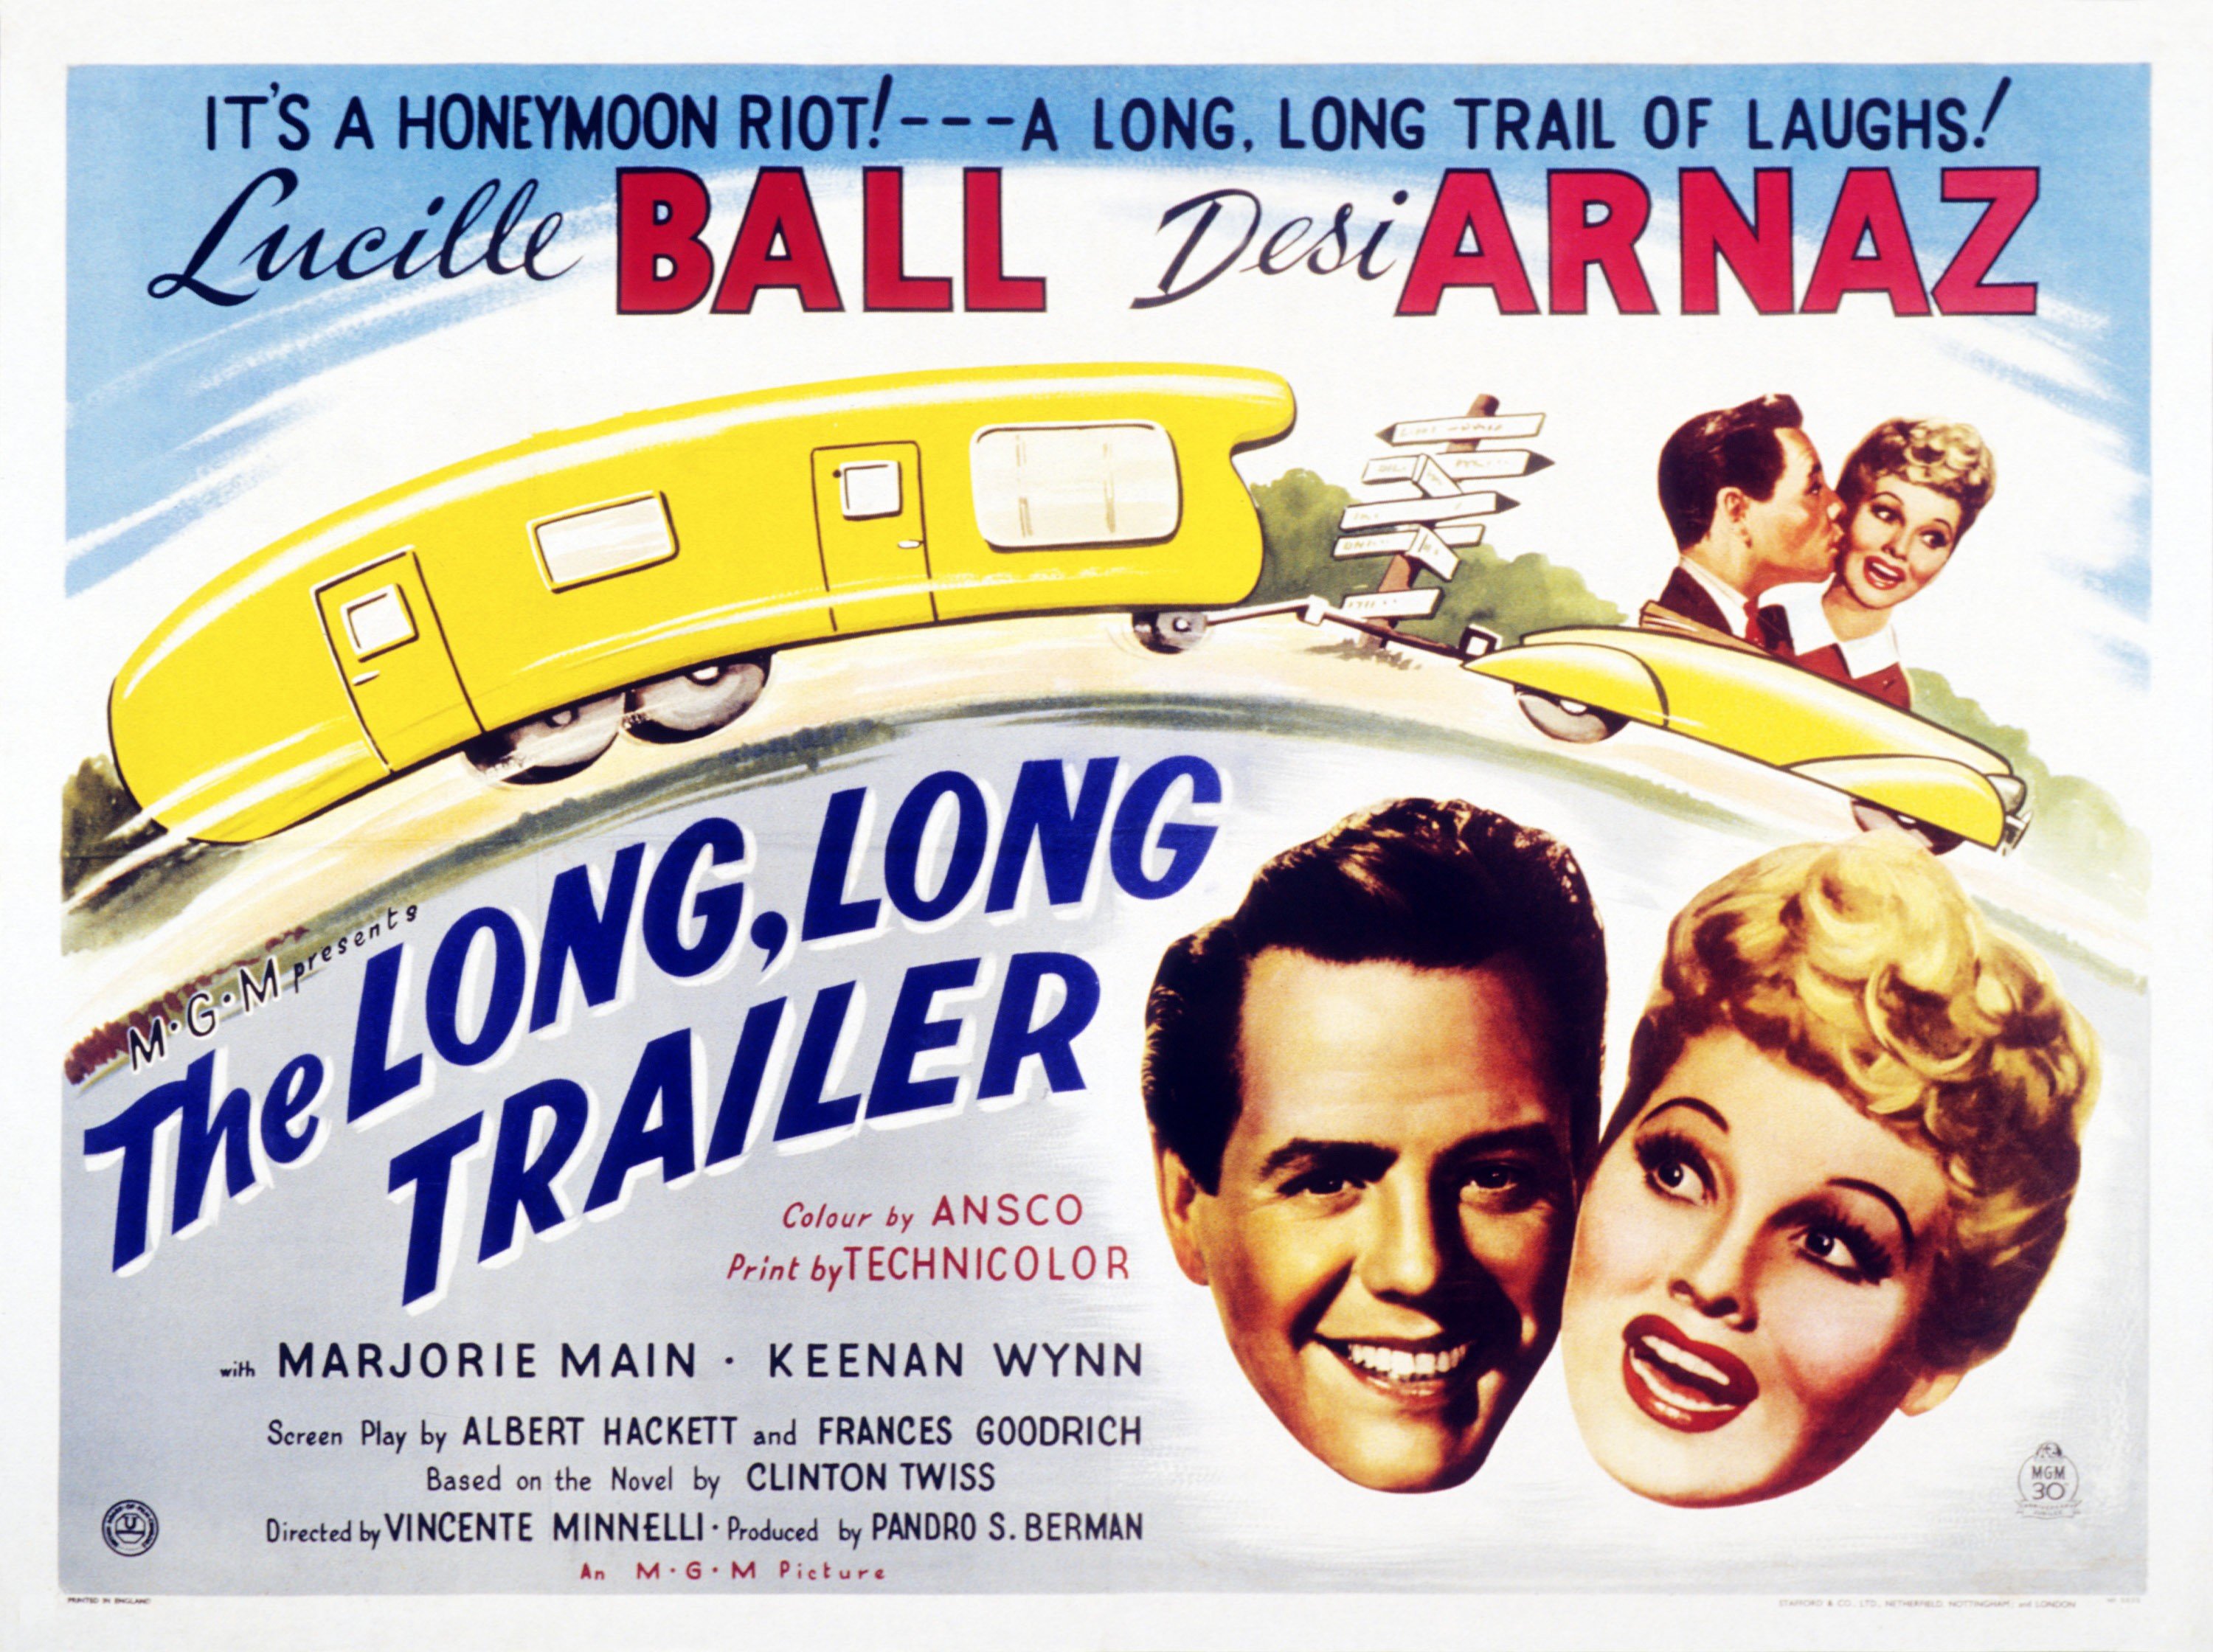 The heads of Desi Arnaz and Lucille Ball on the poster for The Long, Long Trailer